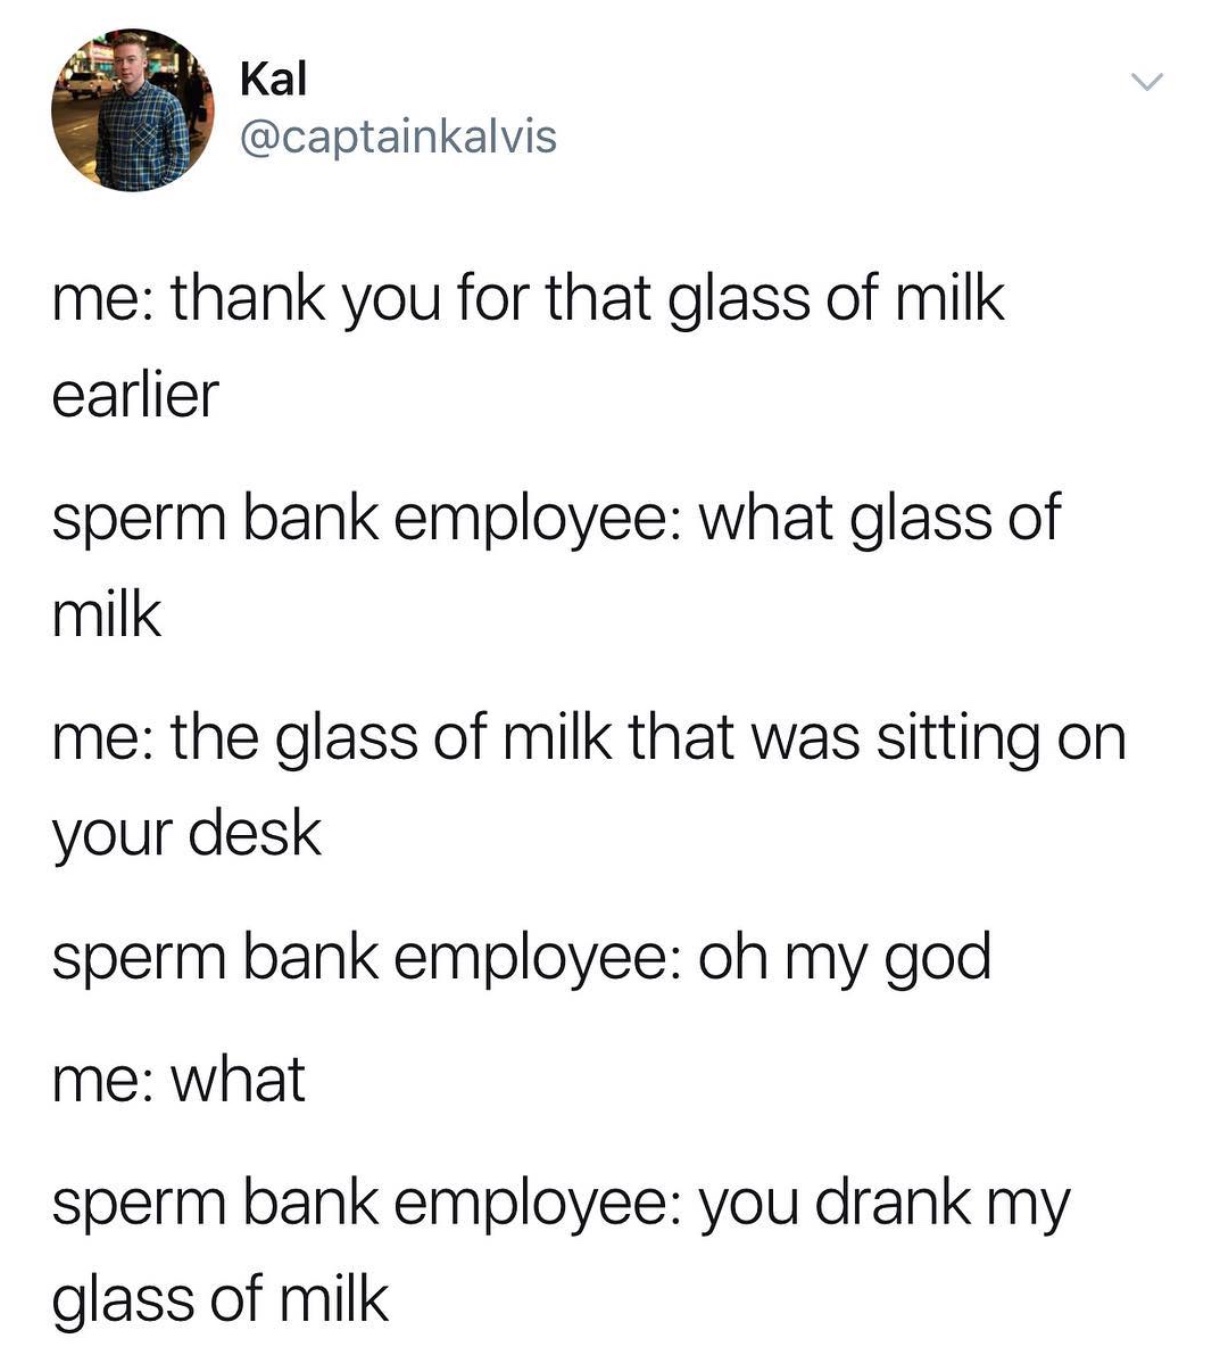 ot3 prompts - Kal me thank you for that glass of milk earlier sperm bank employee what glass of milk me the glass of milk that was sitting on your desk sperm bank employee oh my god me what sperm bank employee you drank my glass of milk